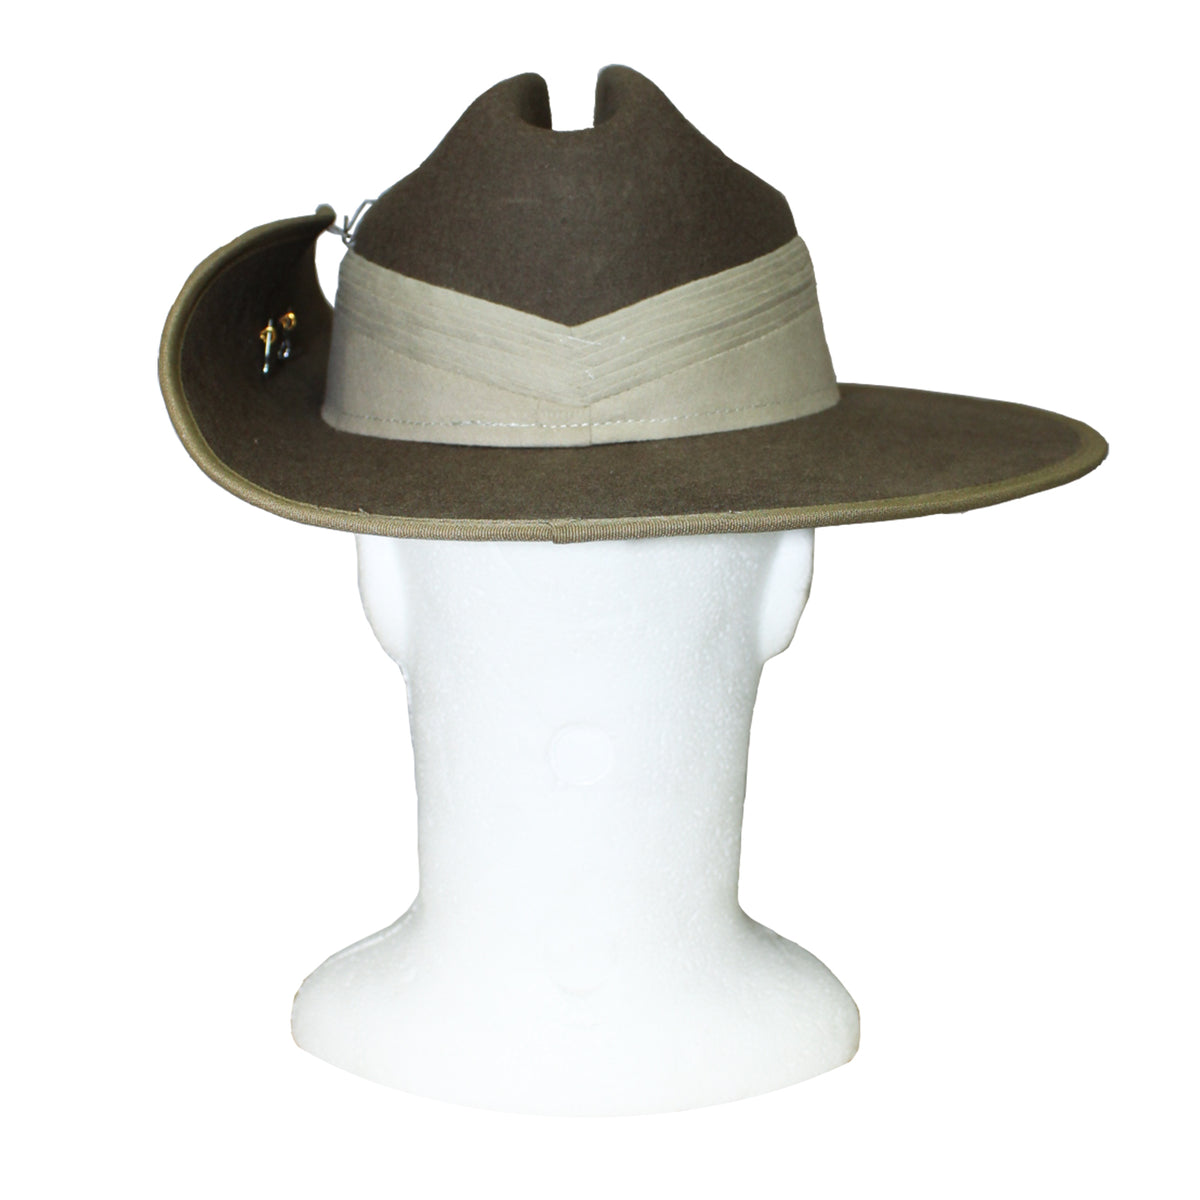 Reproduction Australian Army Slouch Hat – The Outdoor Gear Co.